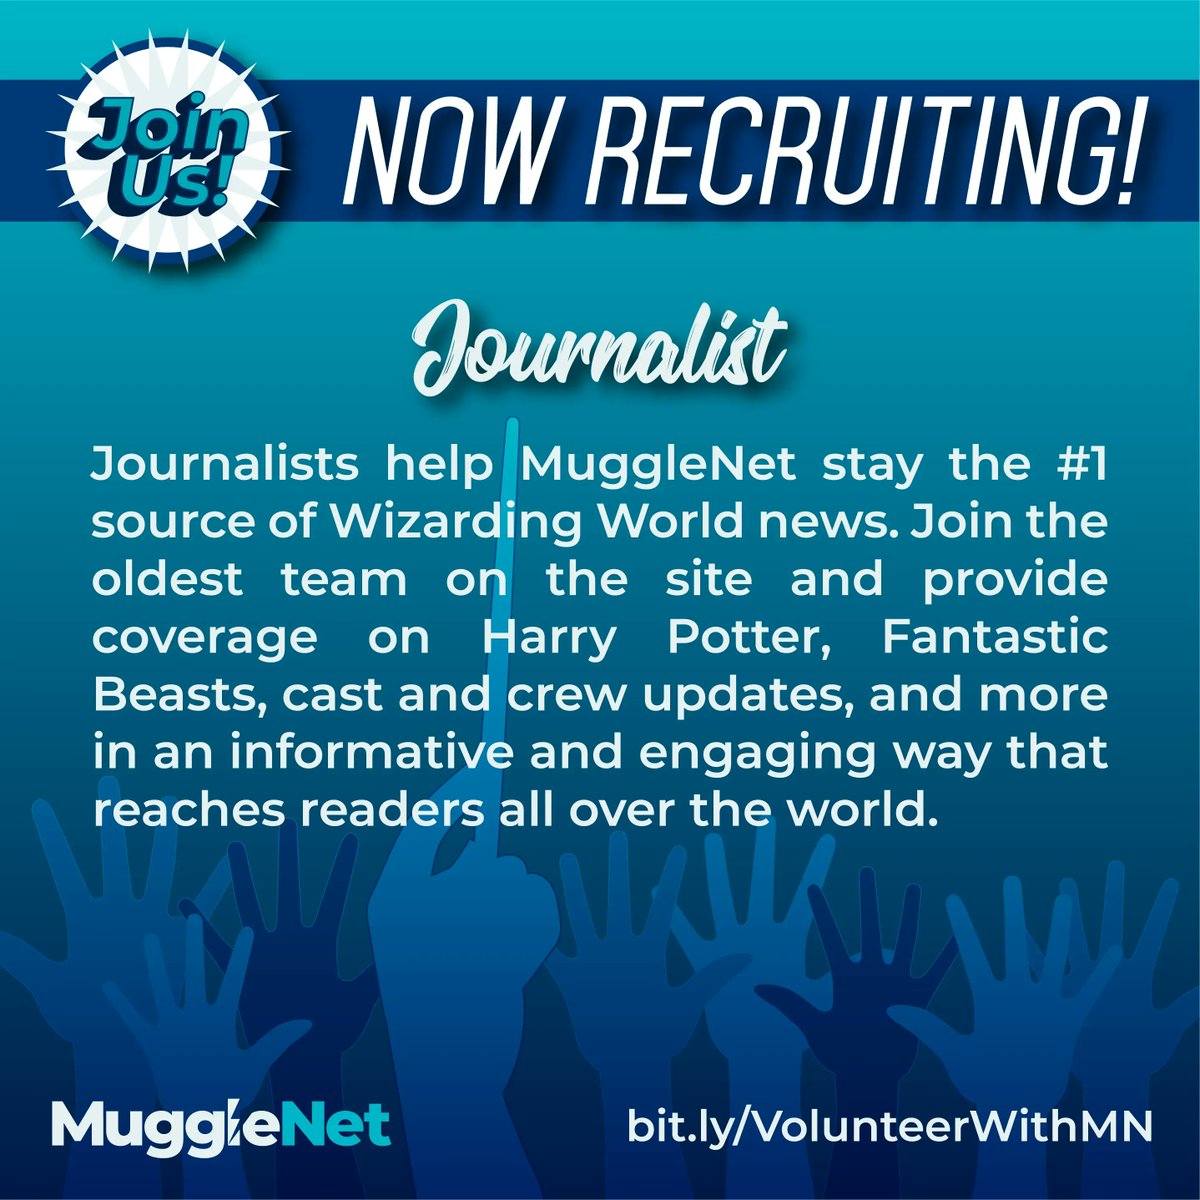 Do you want to write and cover wizarding world news? Join our team and create informative and engaging content! 🖊️⚡
bit.ly/VolunteerWithMN 
#VolunteerWithMuggleNet